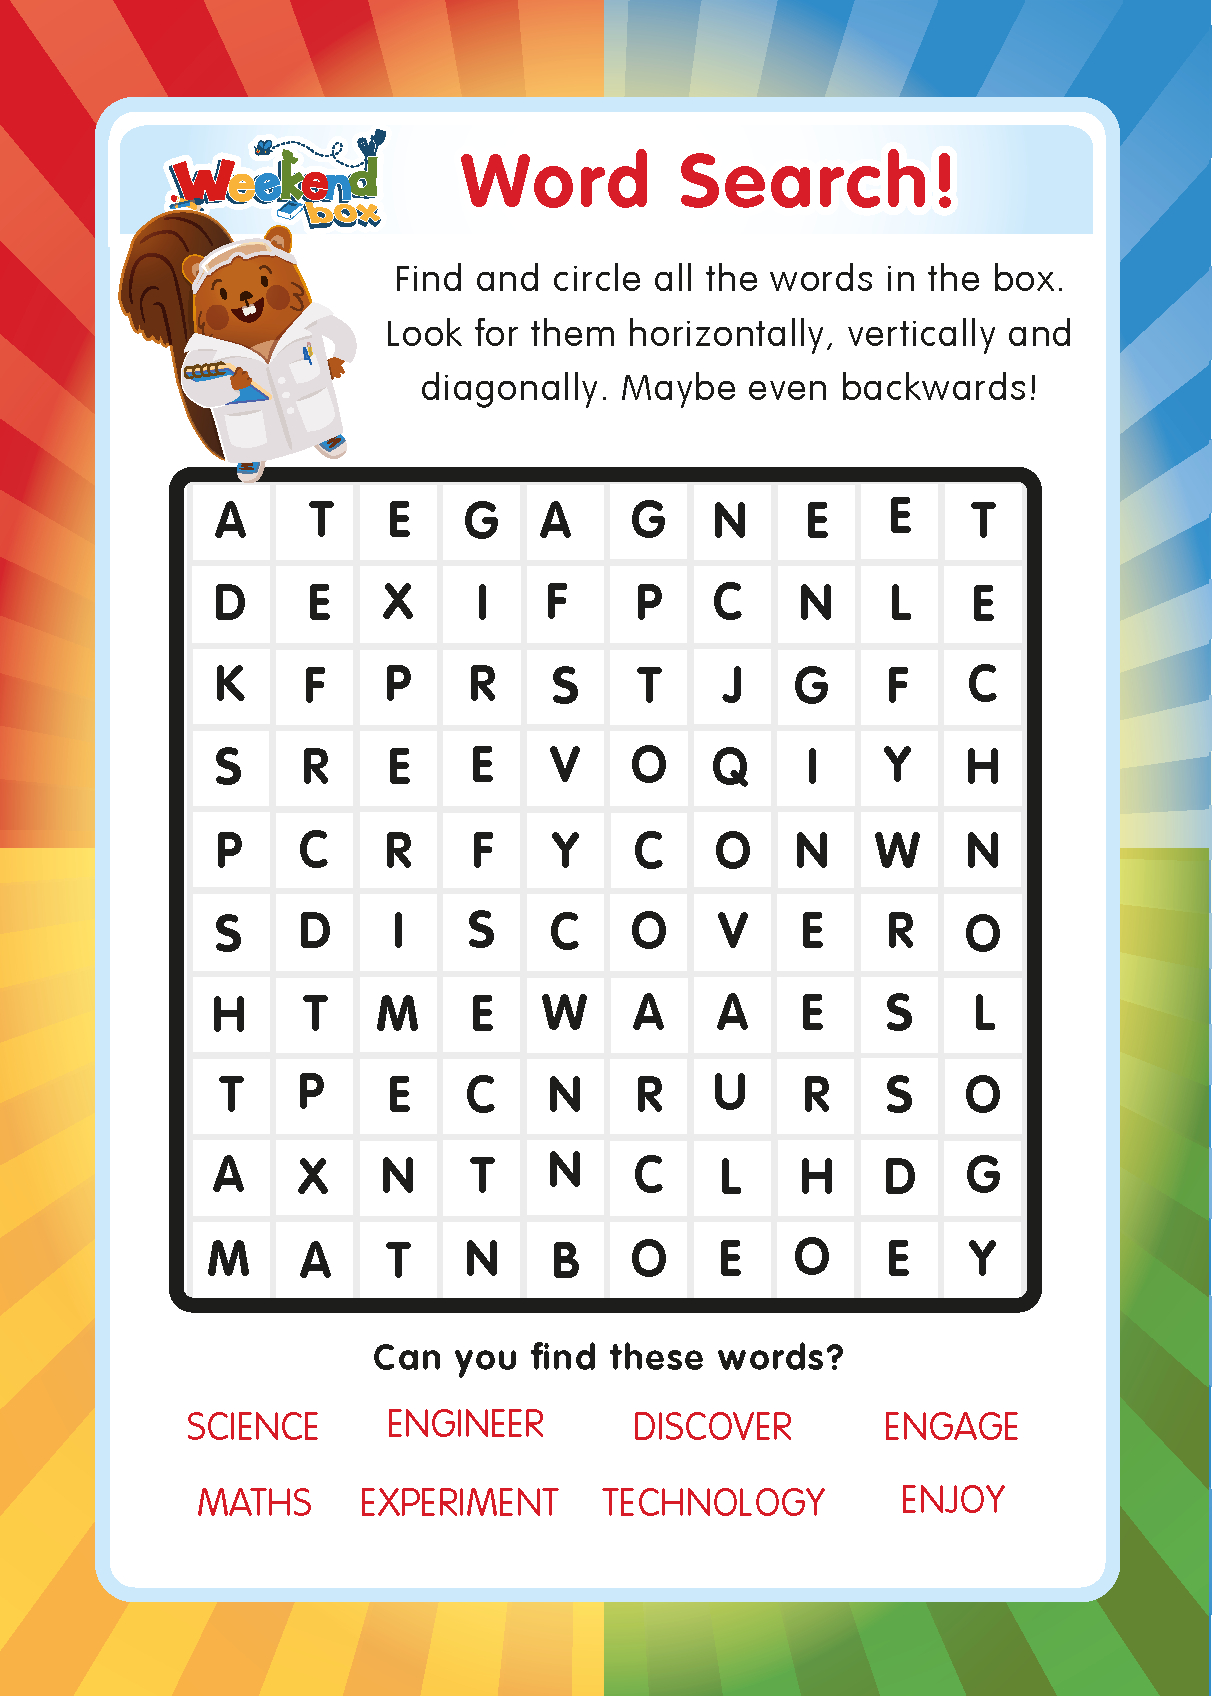 Free Weekend Box Club Printable Word Search Puzzles For Children - Free Online Printable Word Search